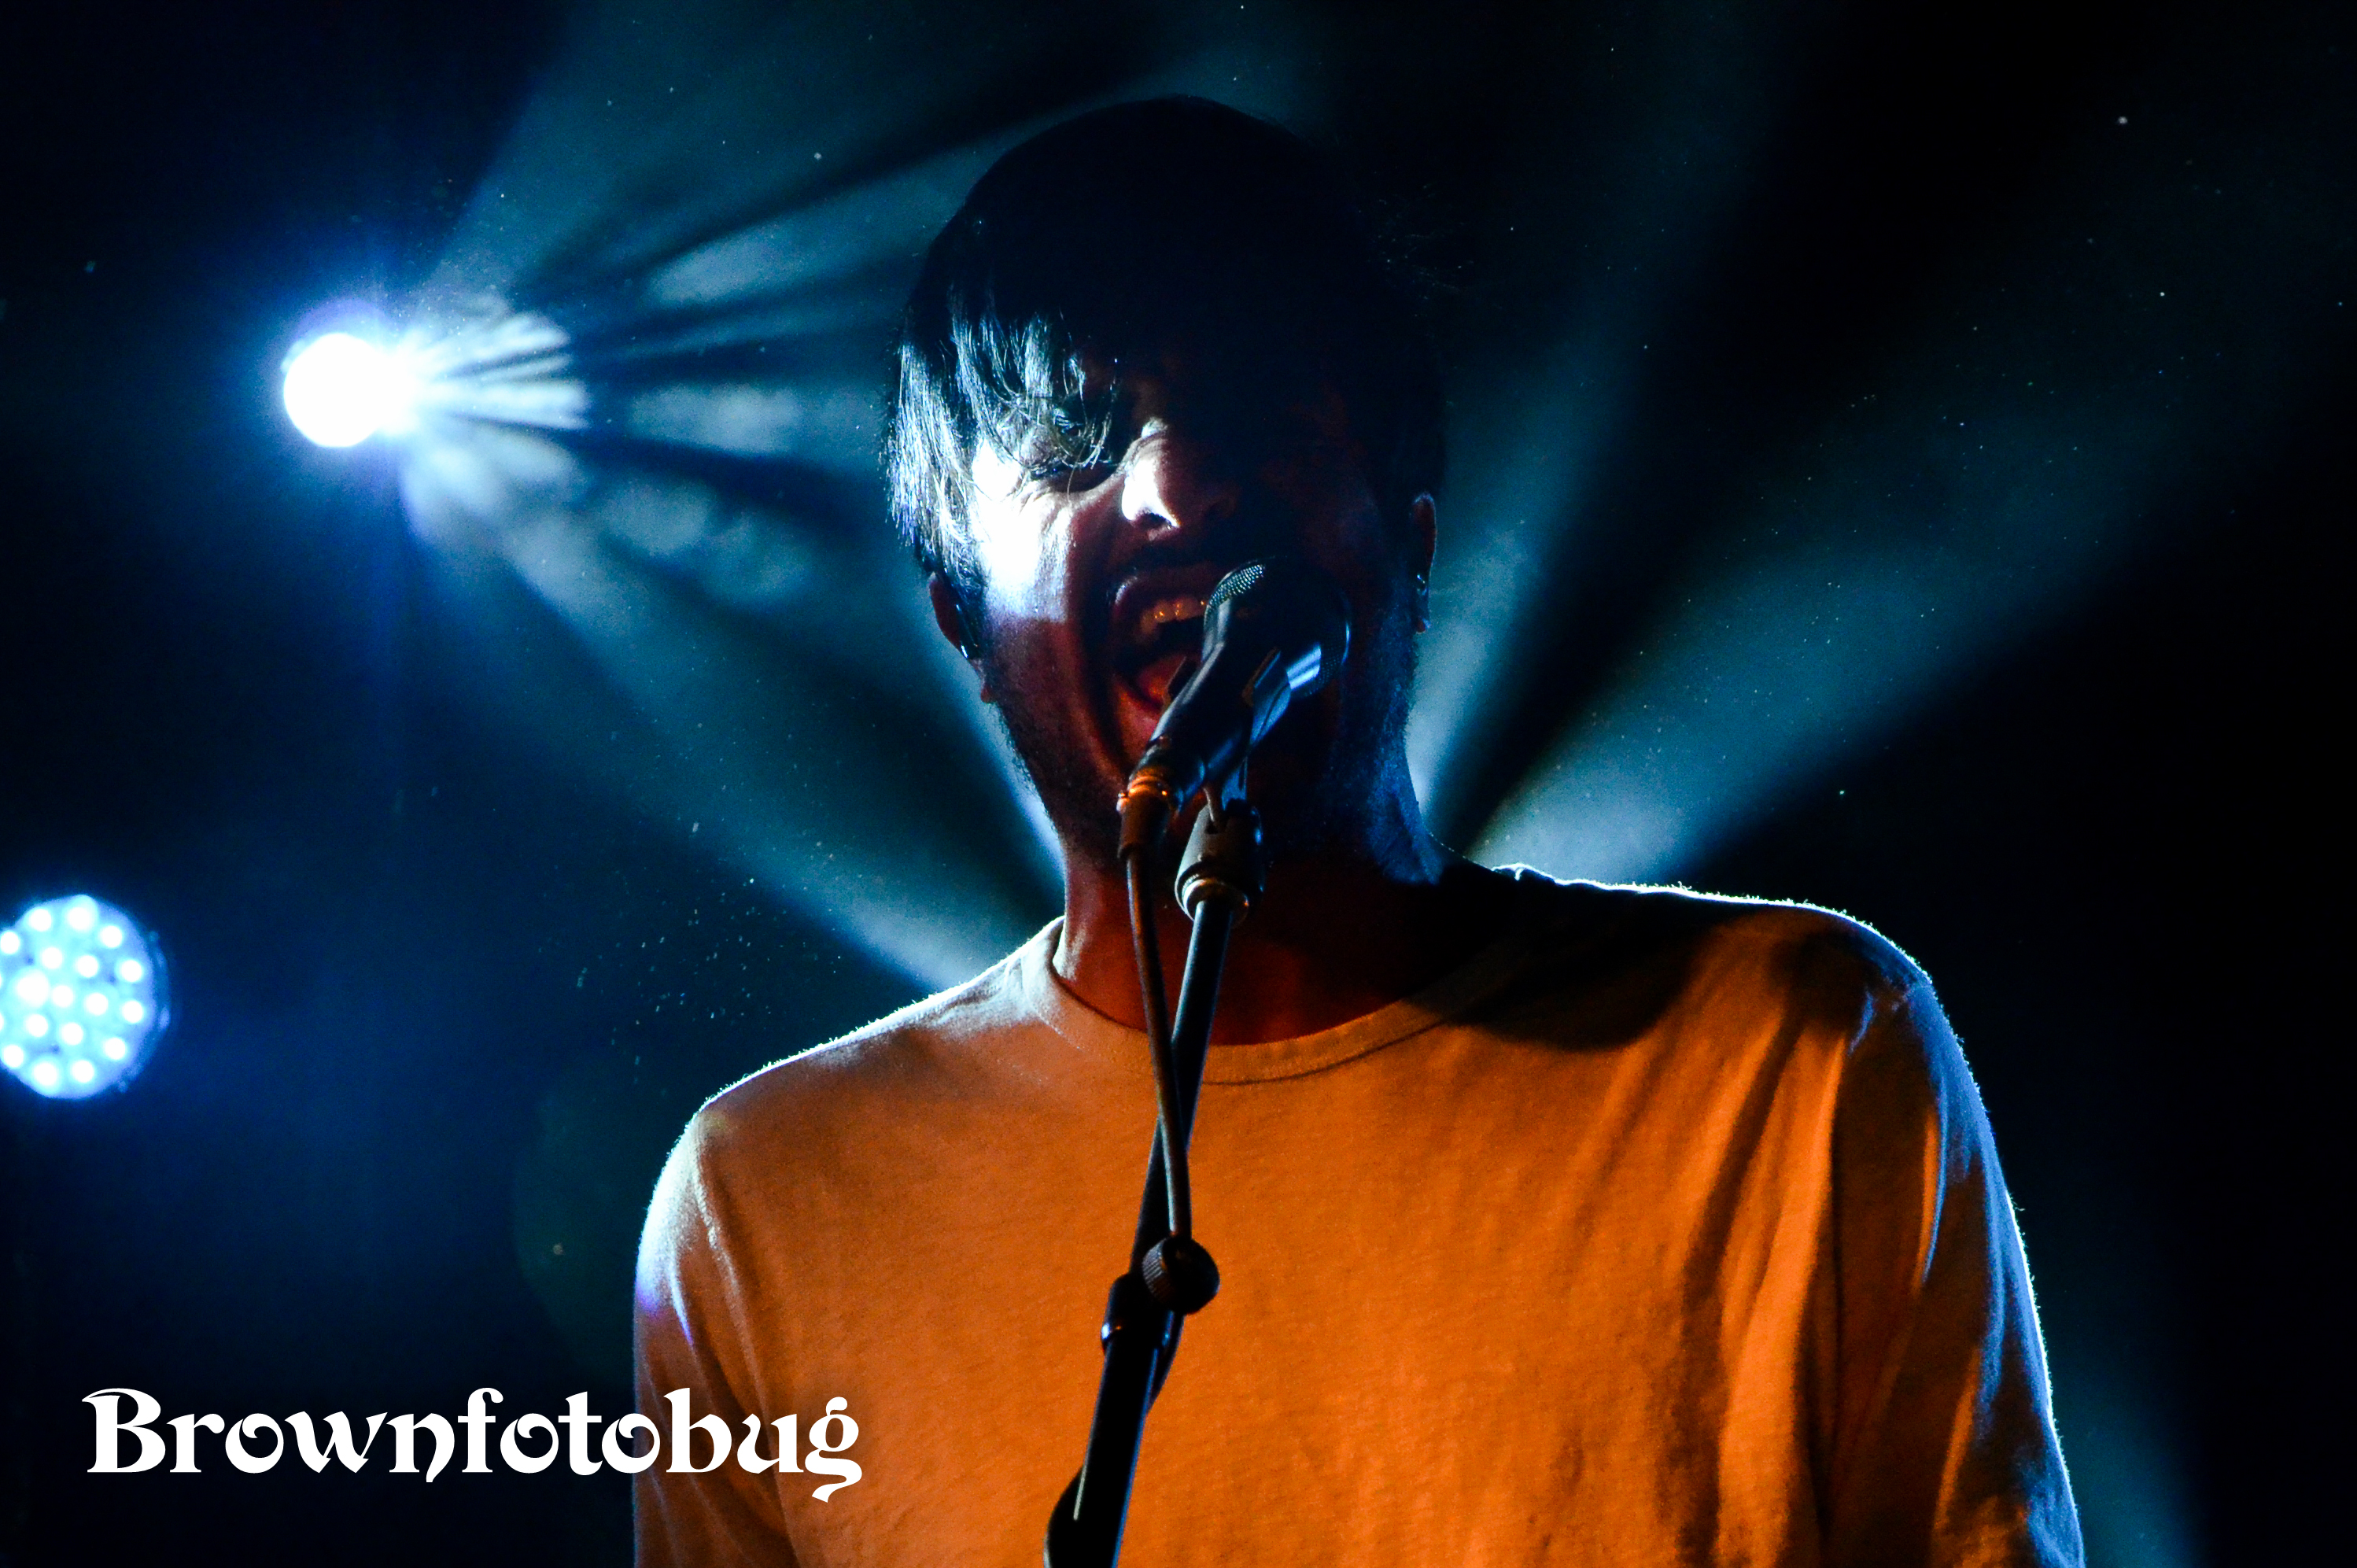 Young the Giant Live at Showbox (Photo by Arlene Brown)